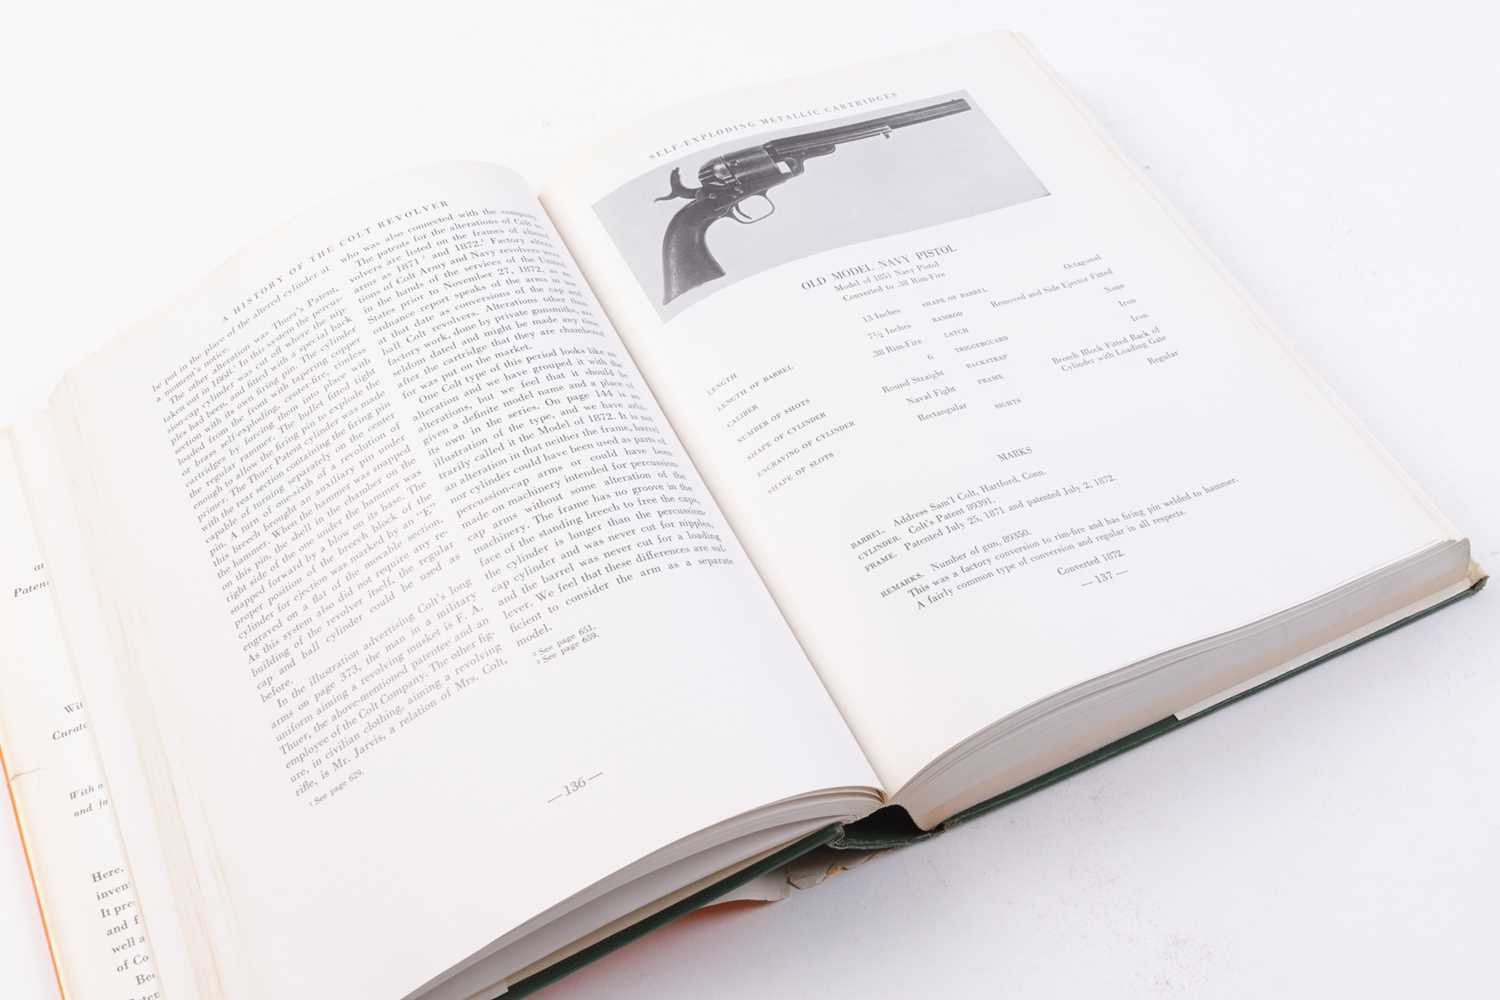 Vol: A History of The Colt Revolver, 1836 - 1940 by Charles T Haven & Frank A Belden - Image 2 of 6